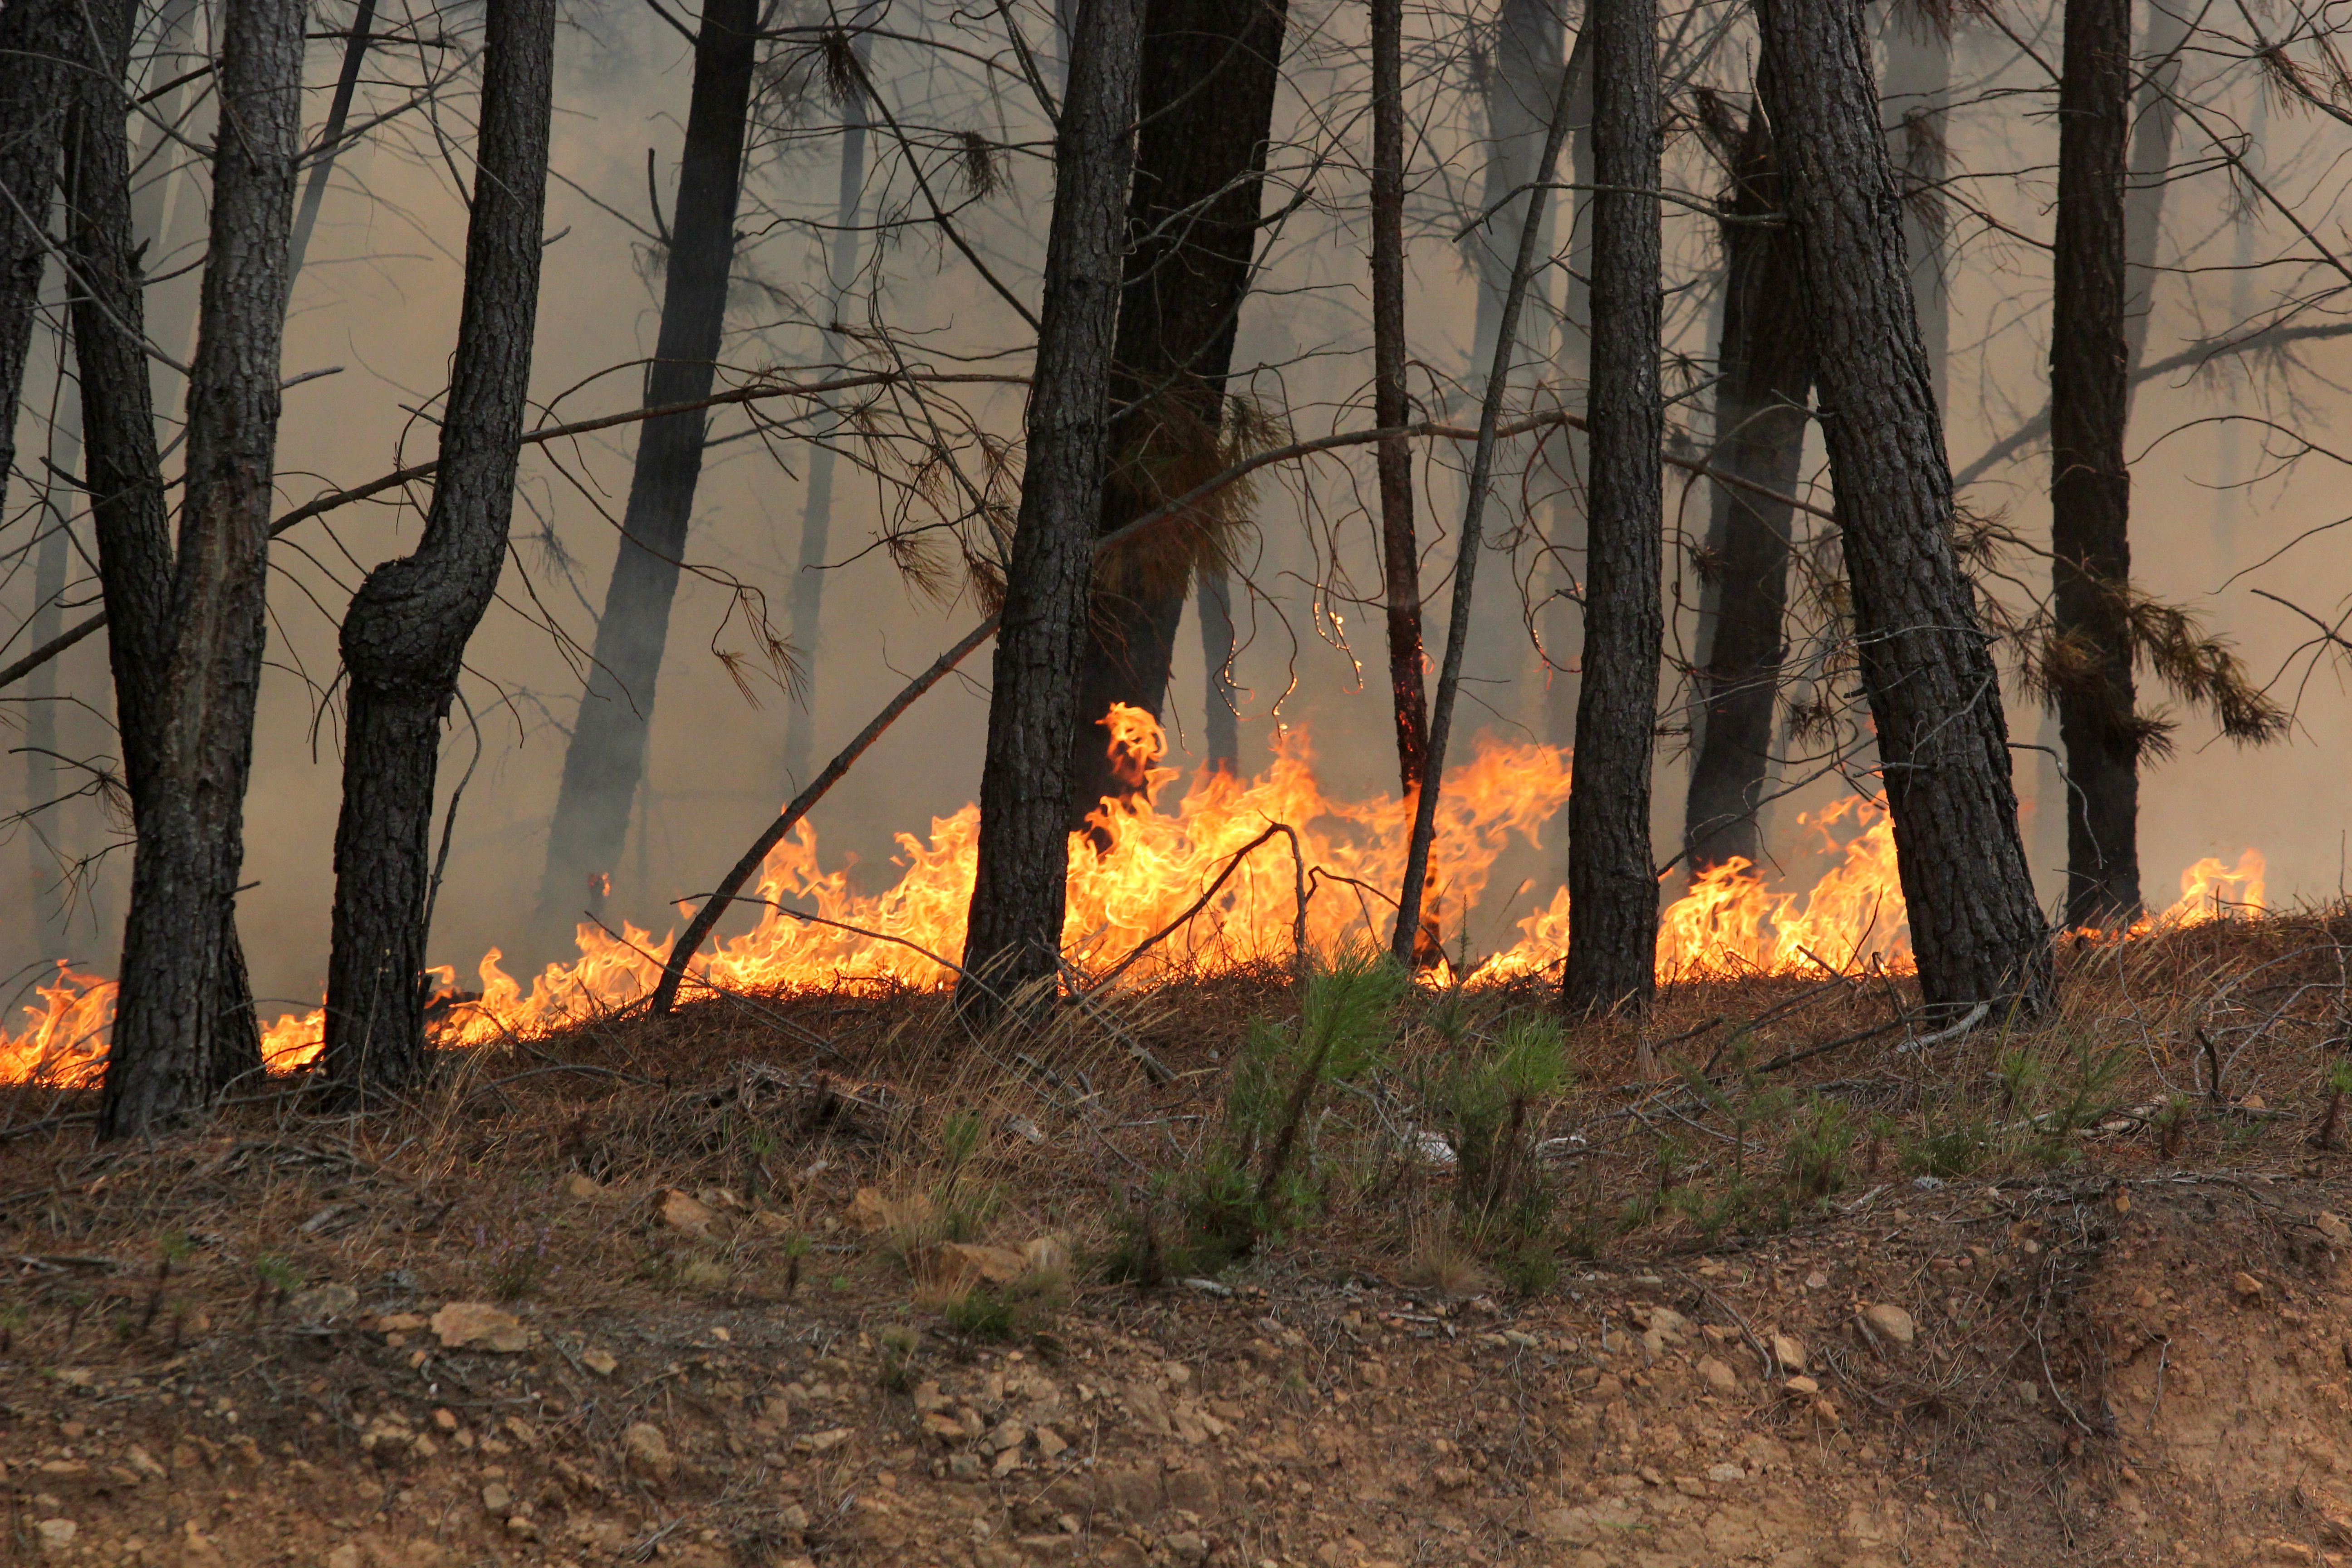 Wildfire burning through a wooded area